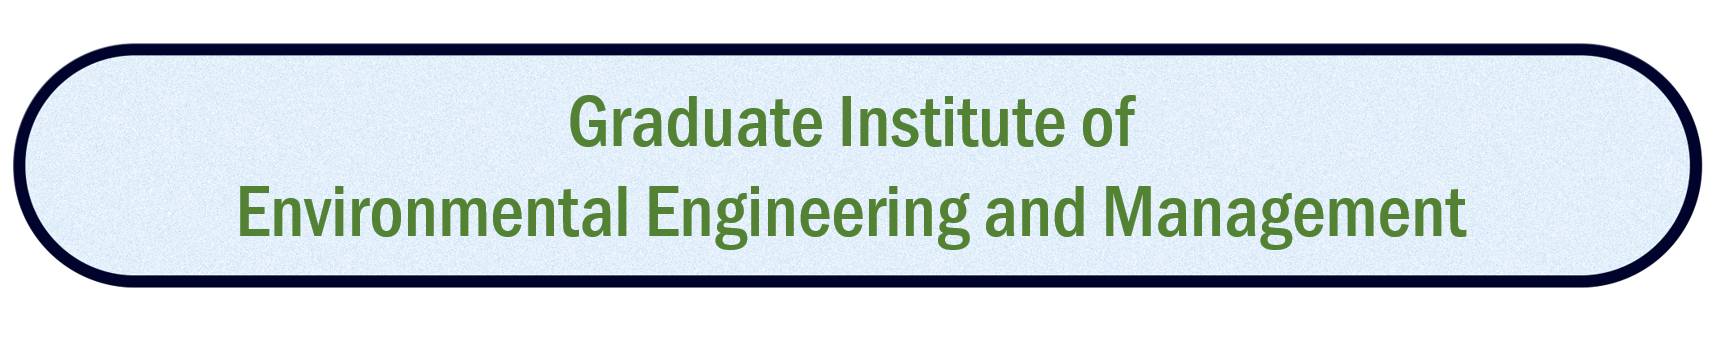 Graduate Institute of Environmental Engineering and Management